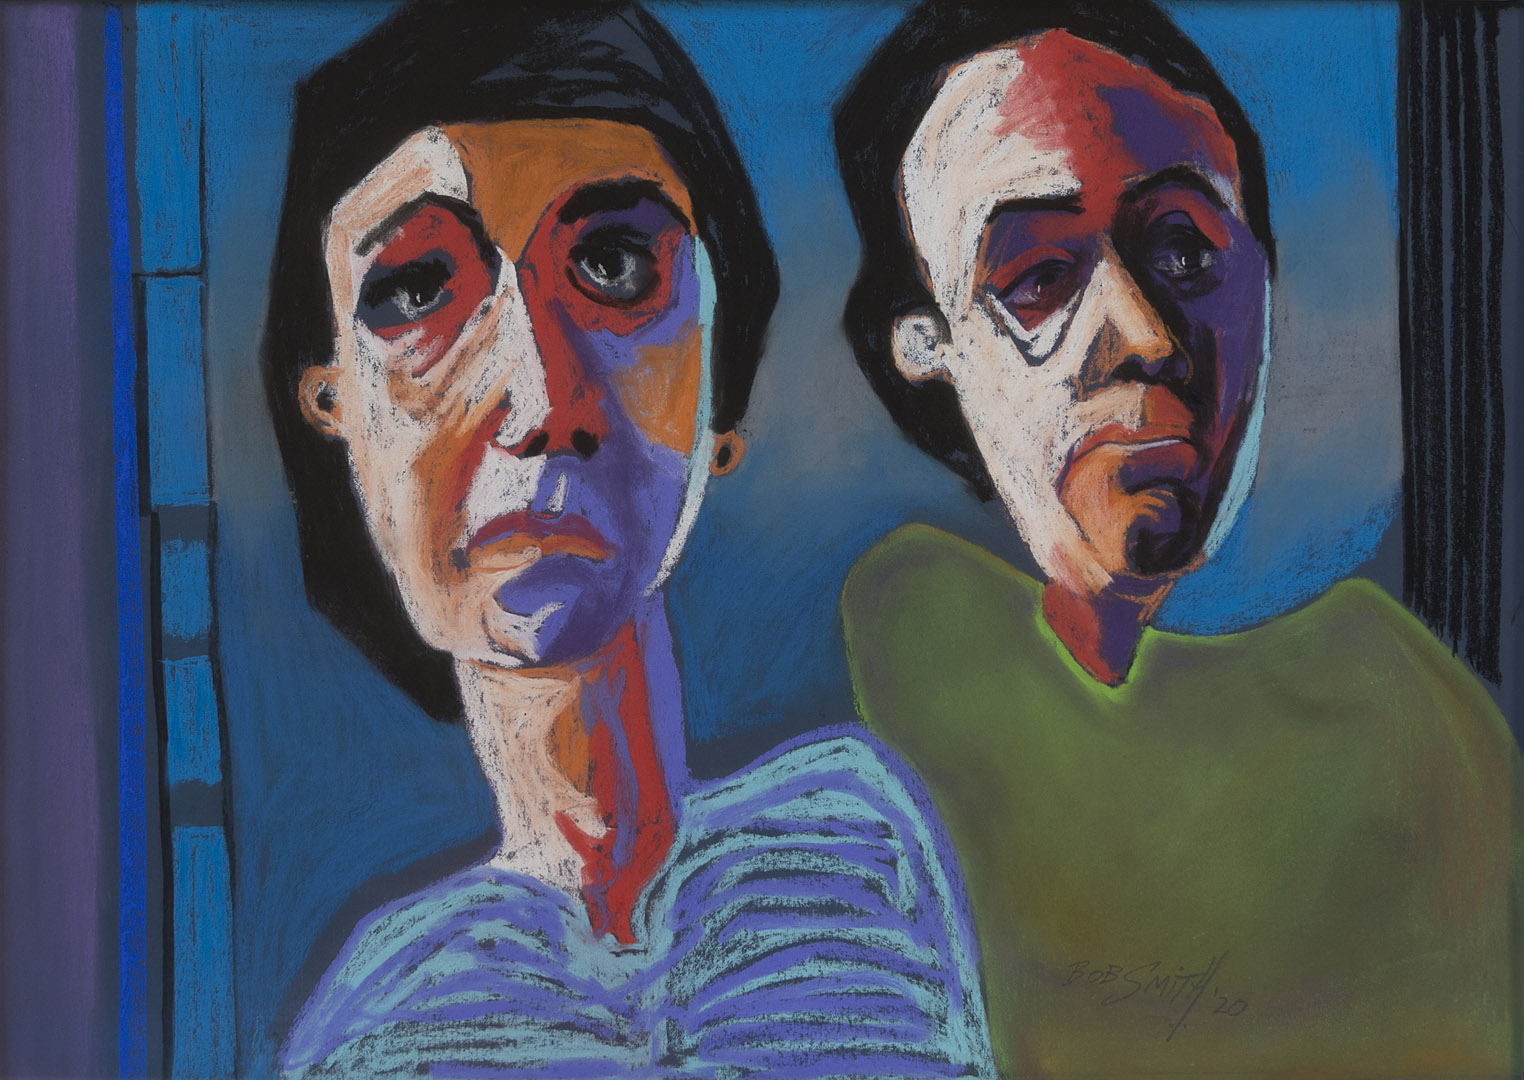 Man and Woman 2020 | Bob Smith | Soft pastels on paper | 77 x 94.5 cm framed in black | SOLD